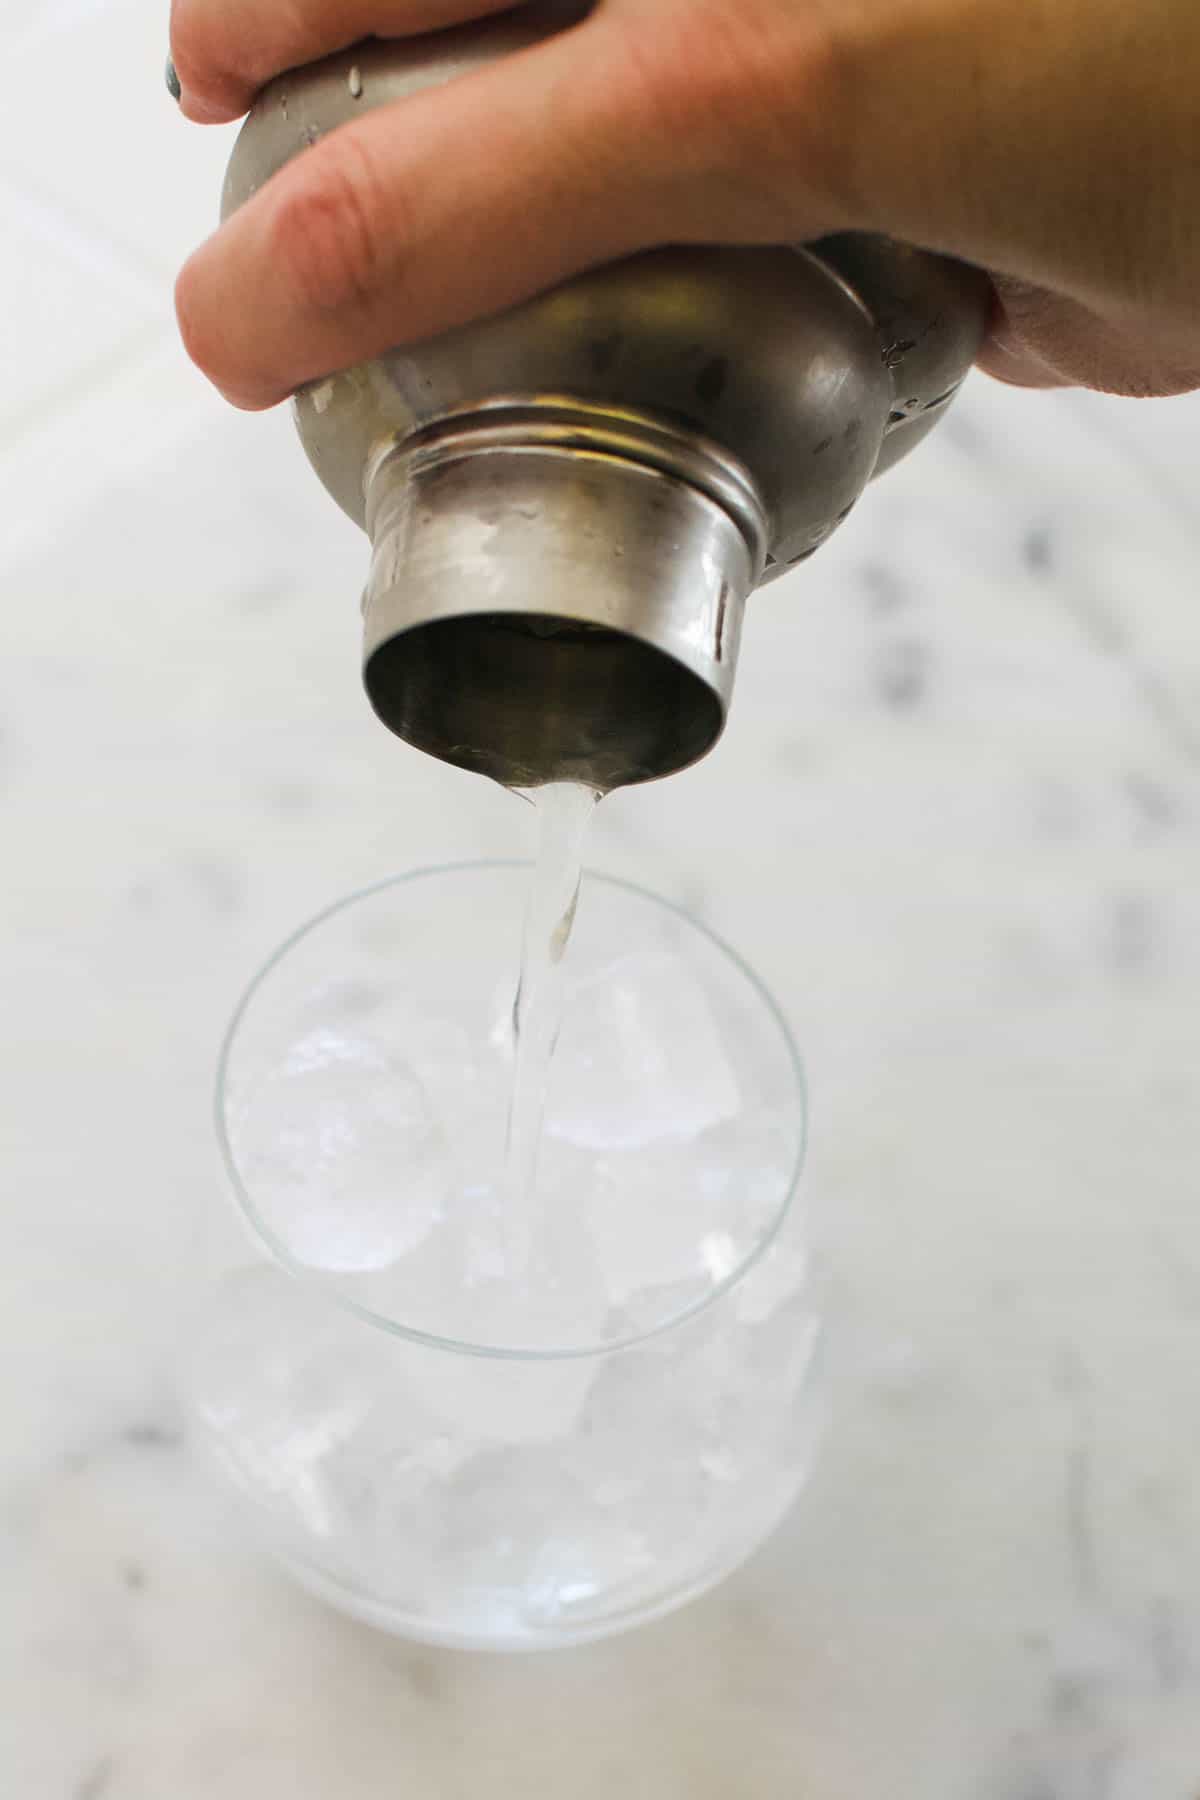 Cocktail being poured into a glass of ice from a cocktail shaker.